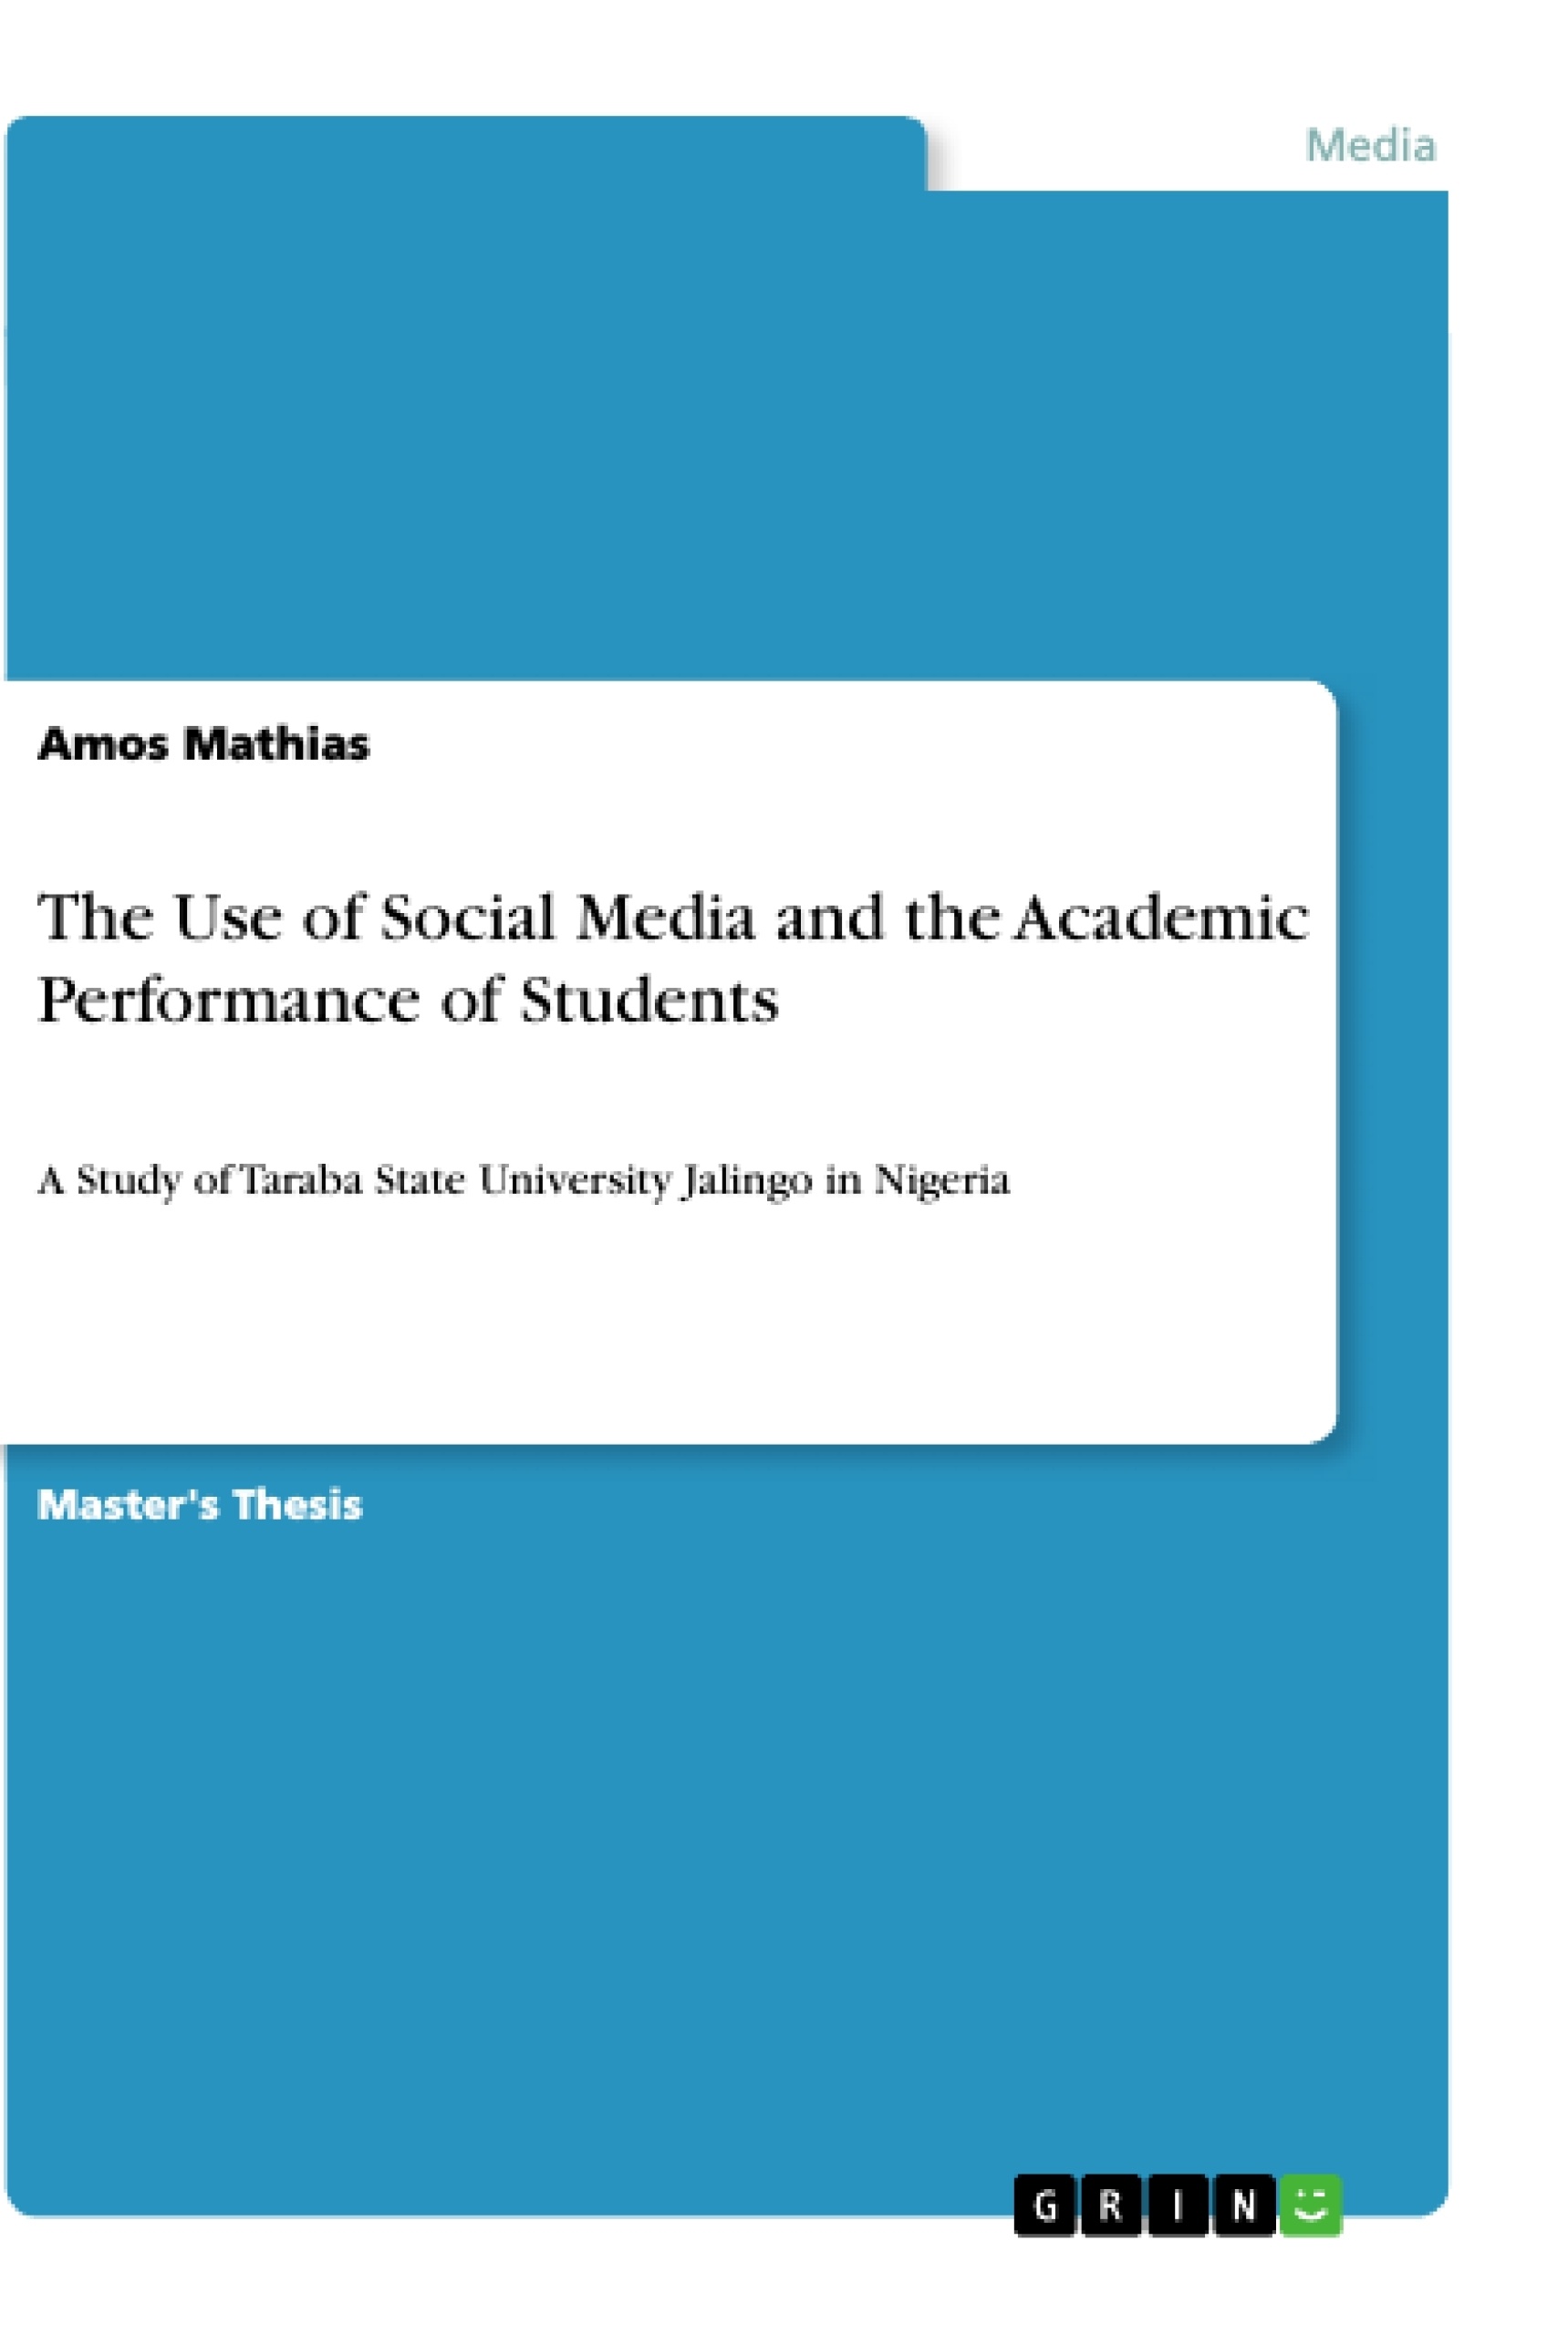 Título: The Use of Social Media and the Academic Performance of Students